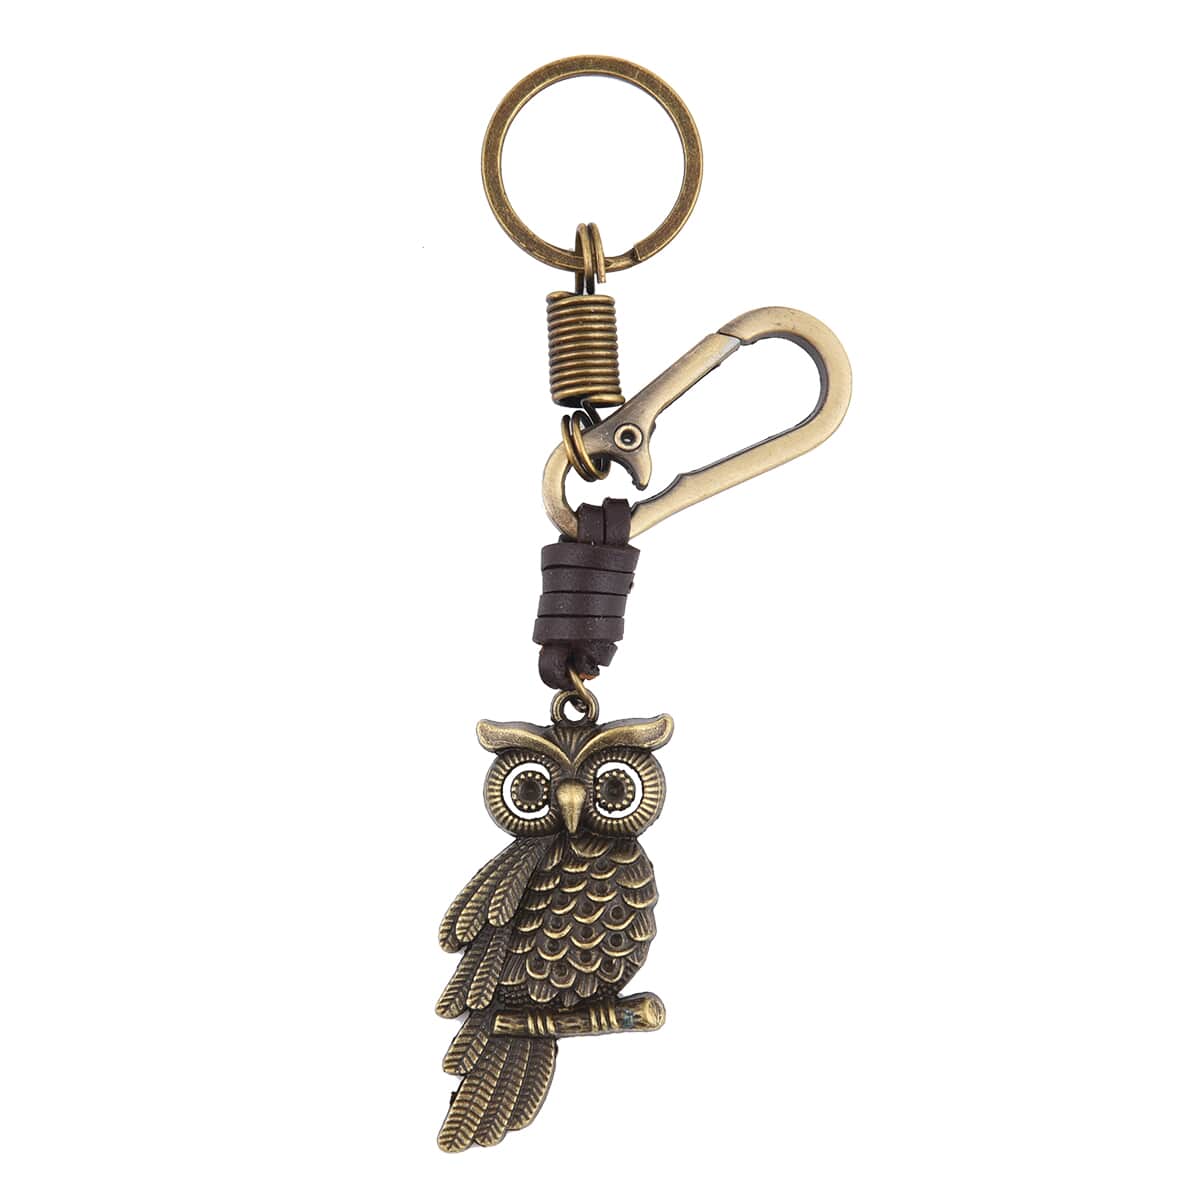 Set of 3 Keychain in Faux Leather and Goldtone - Leopard, Owl and Elephant Shape image number 2